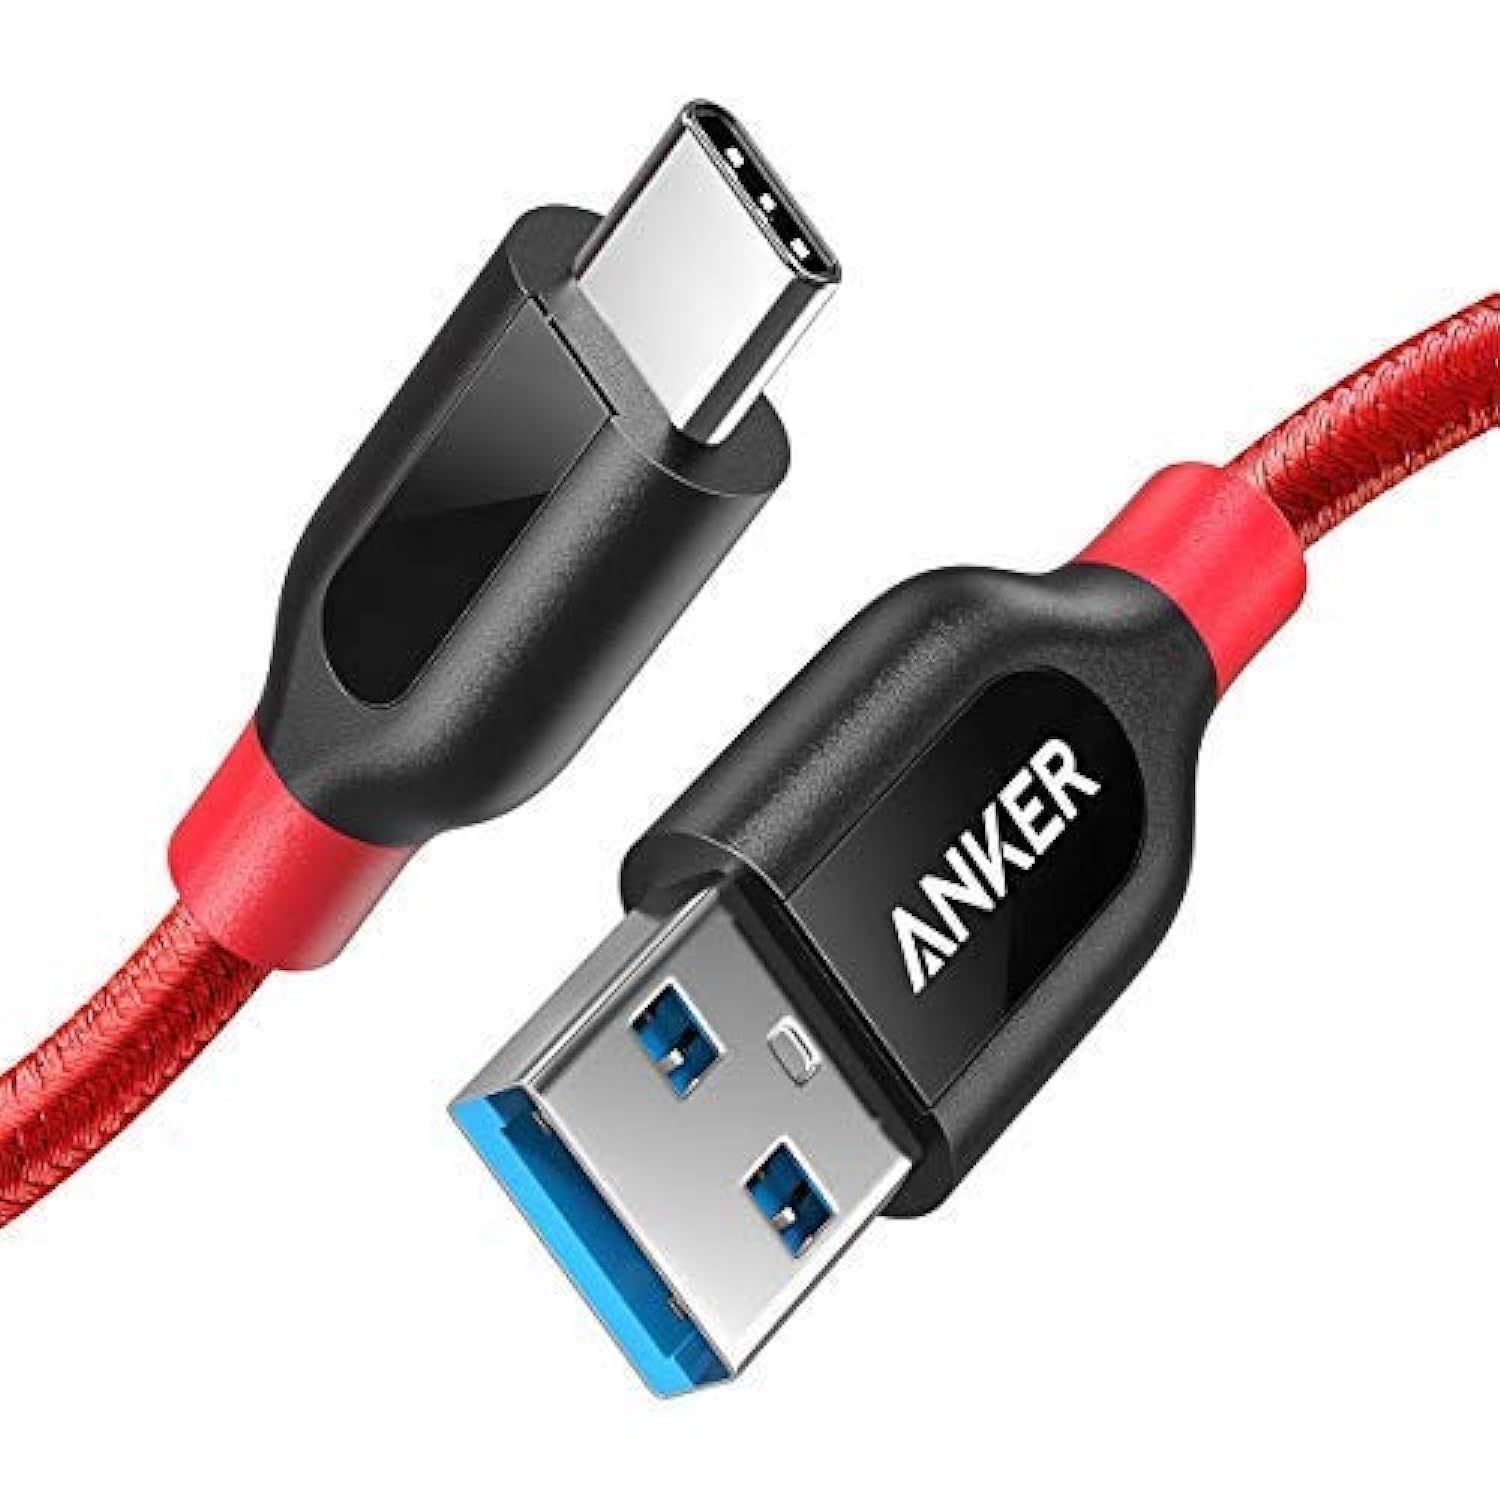 Anker USB C Cable, PowerLine+ USB-C to USB 3.0 cable (3ft/0.9m), High Durability - $39.99